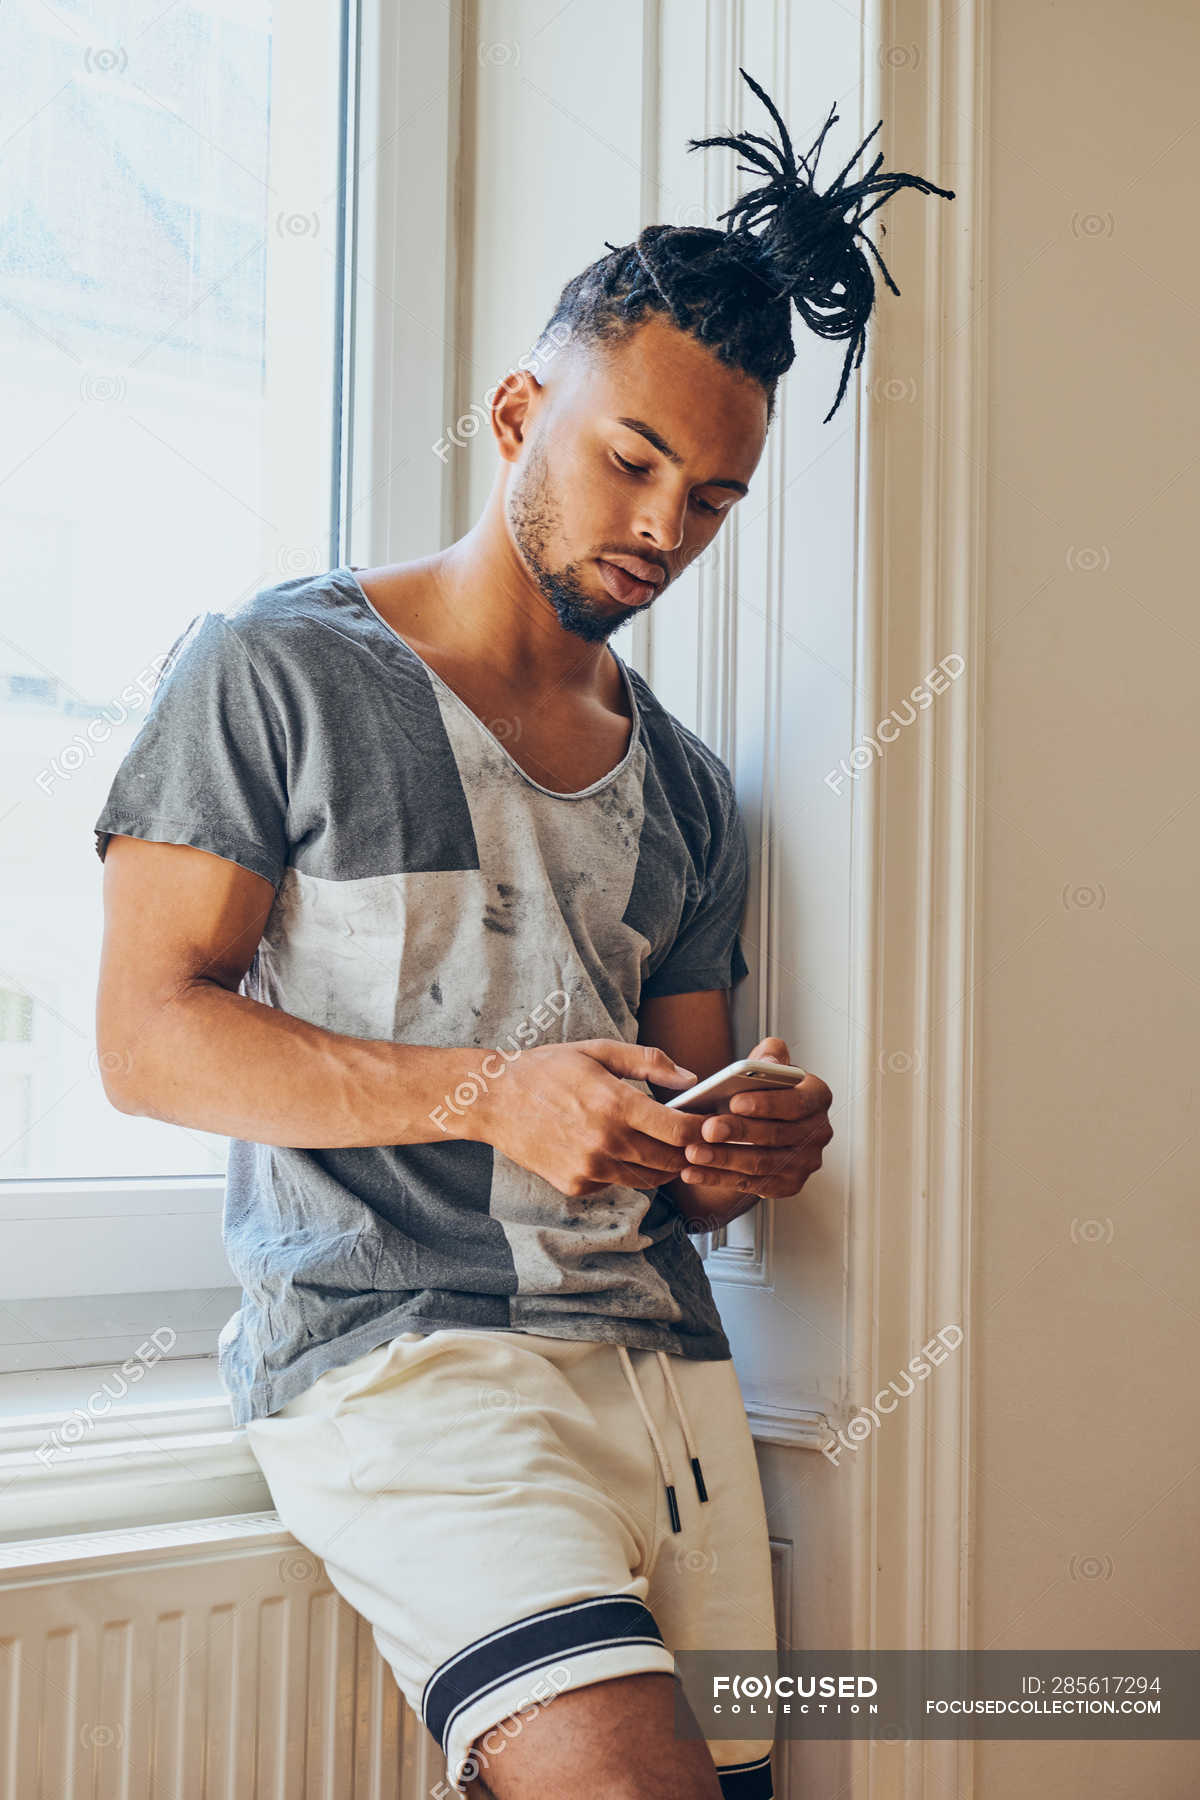 Young African American man with creative hairstyle leaning on windowsill at  home using mobile phone — gadget, subculture - Stock Photo | #285617294